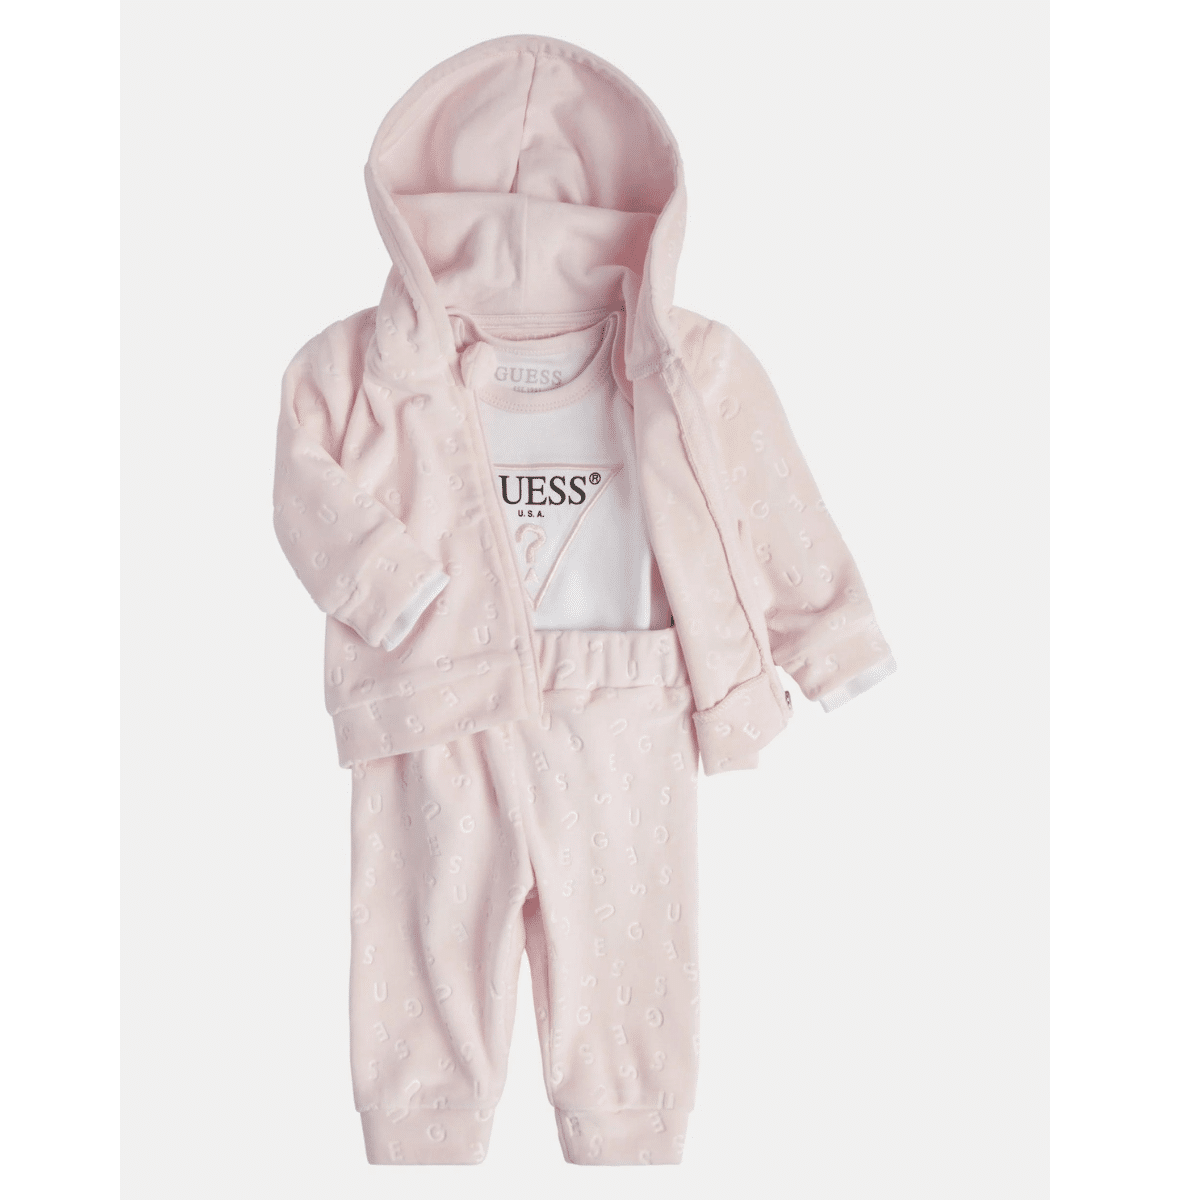 Guess girls baby pale pink outfit